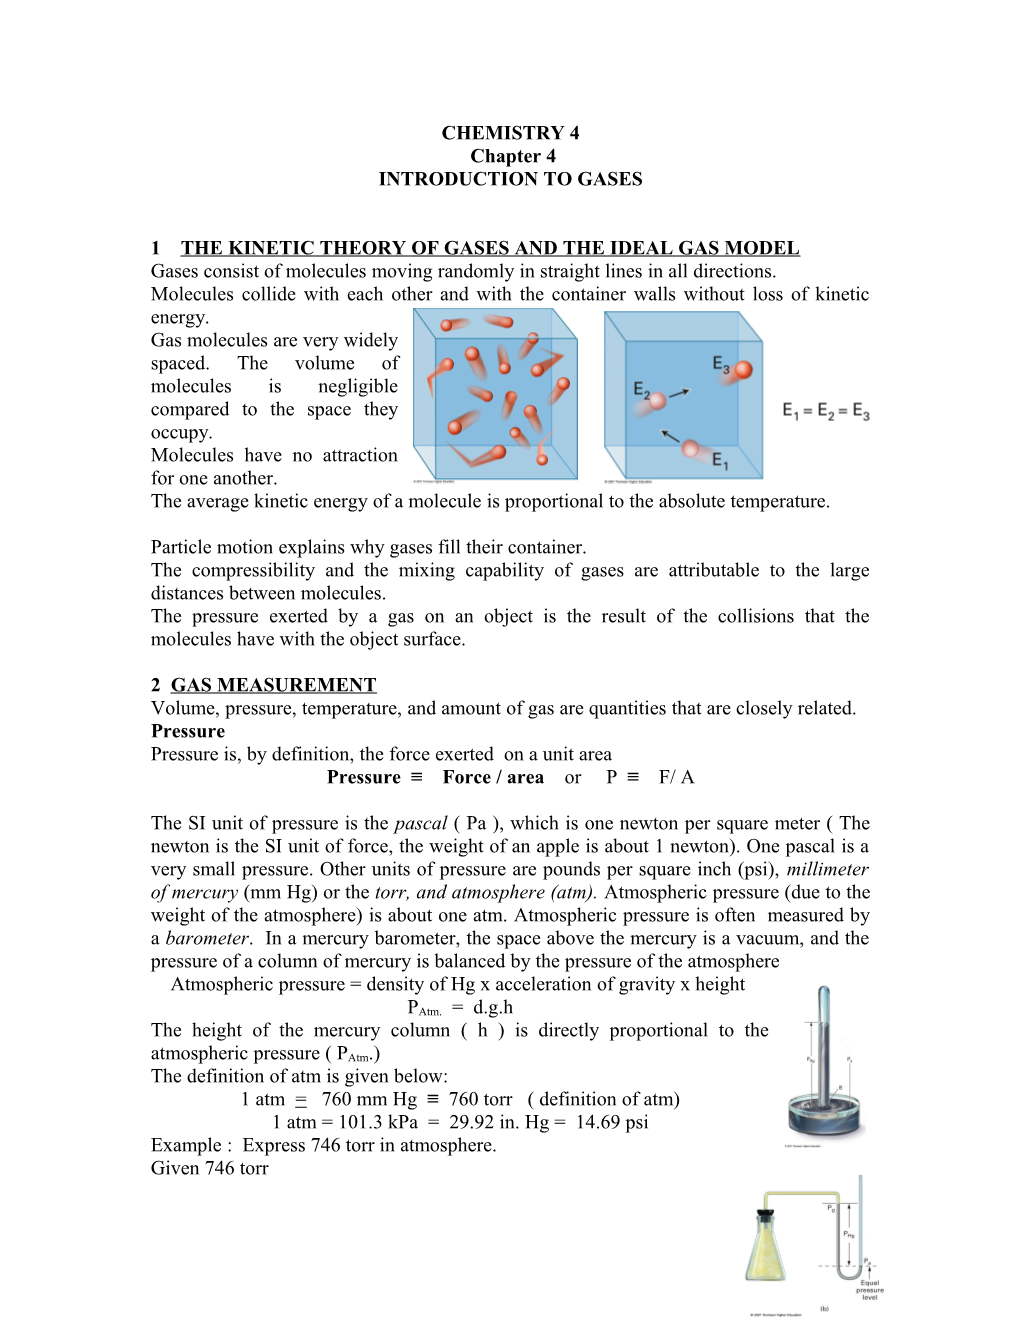 1The Kinetic Theory of Gases and the Ideal Gas Model